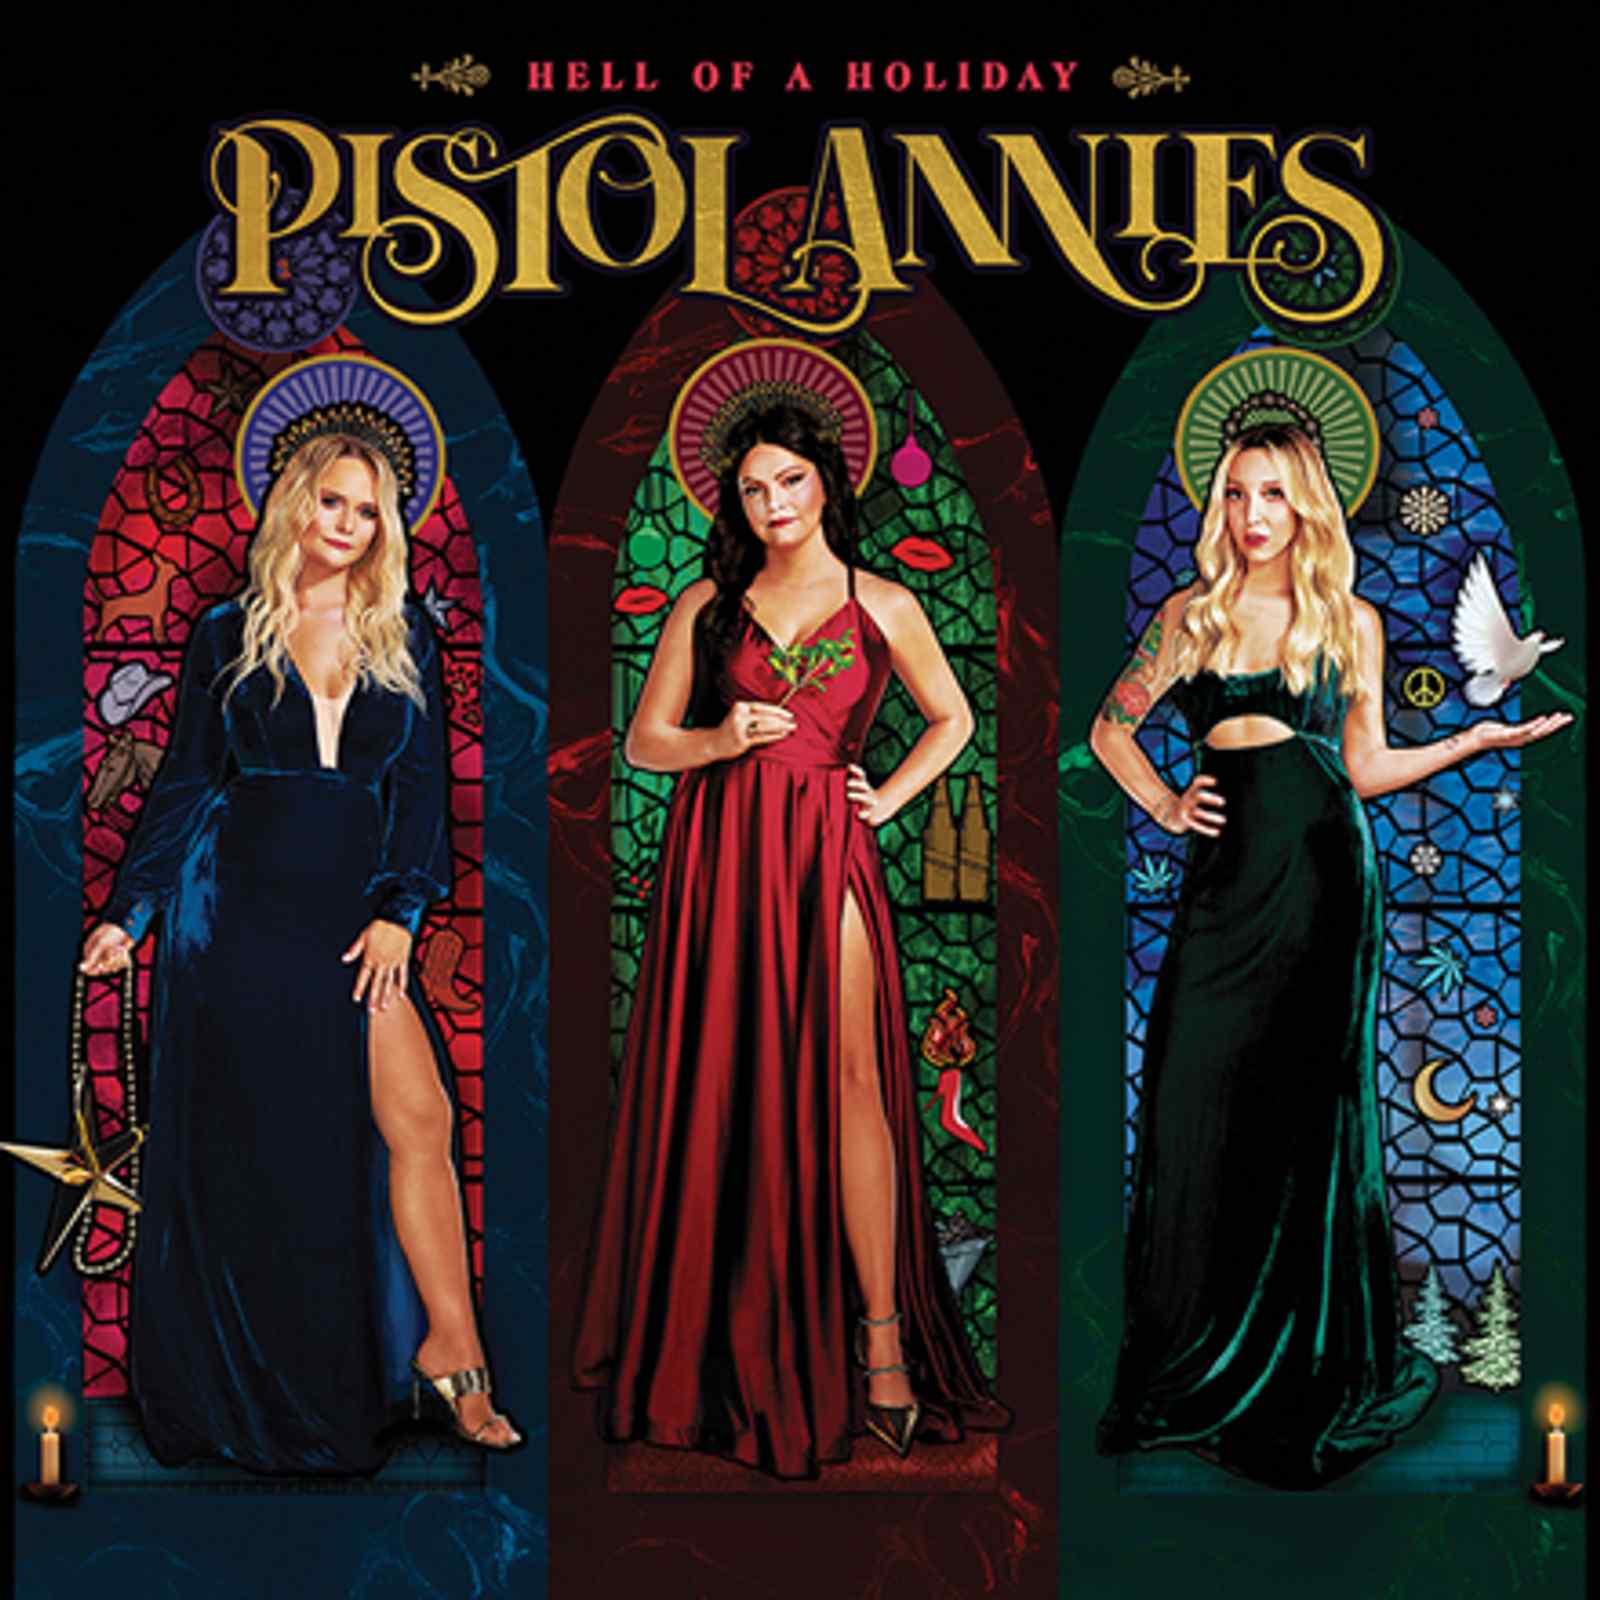 Hell Of A Holiday by Pistol Annies